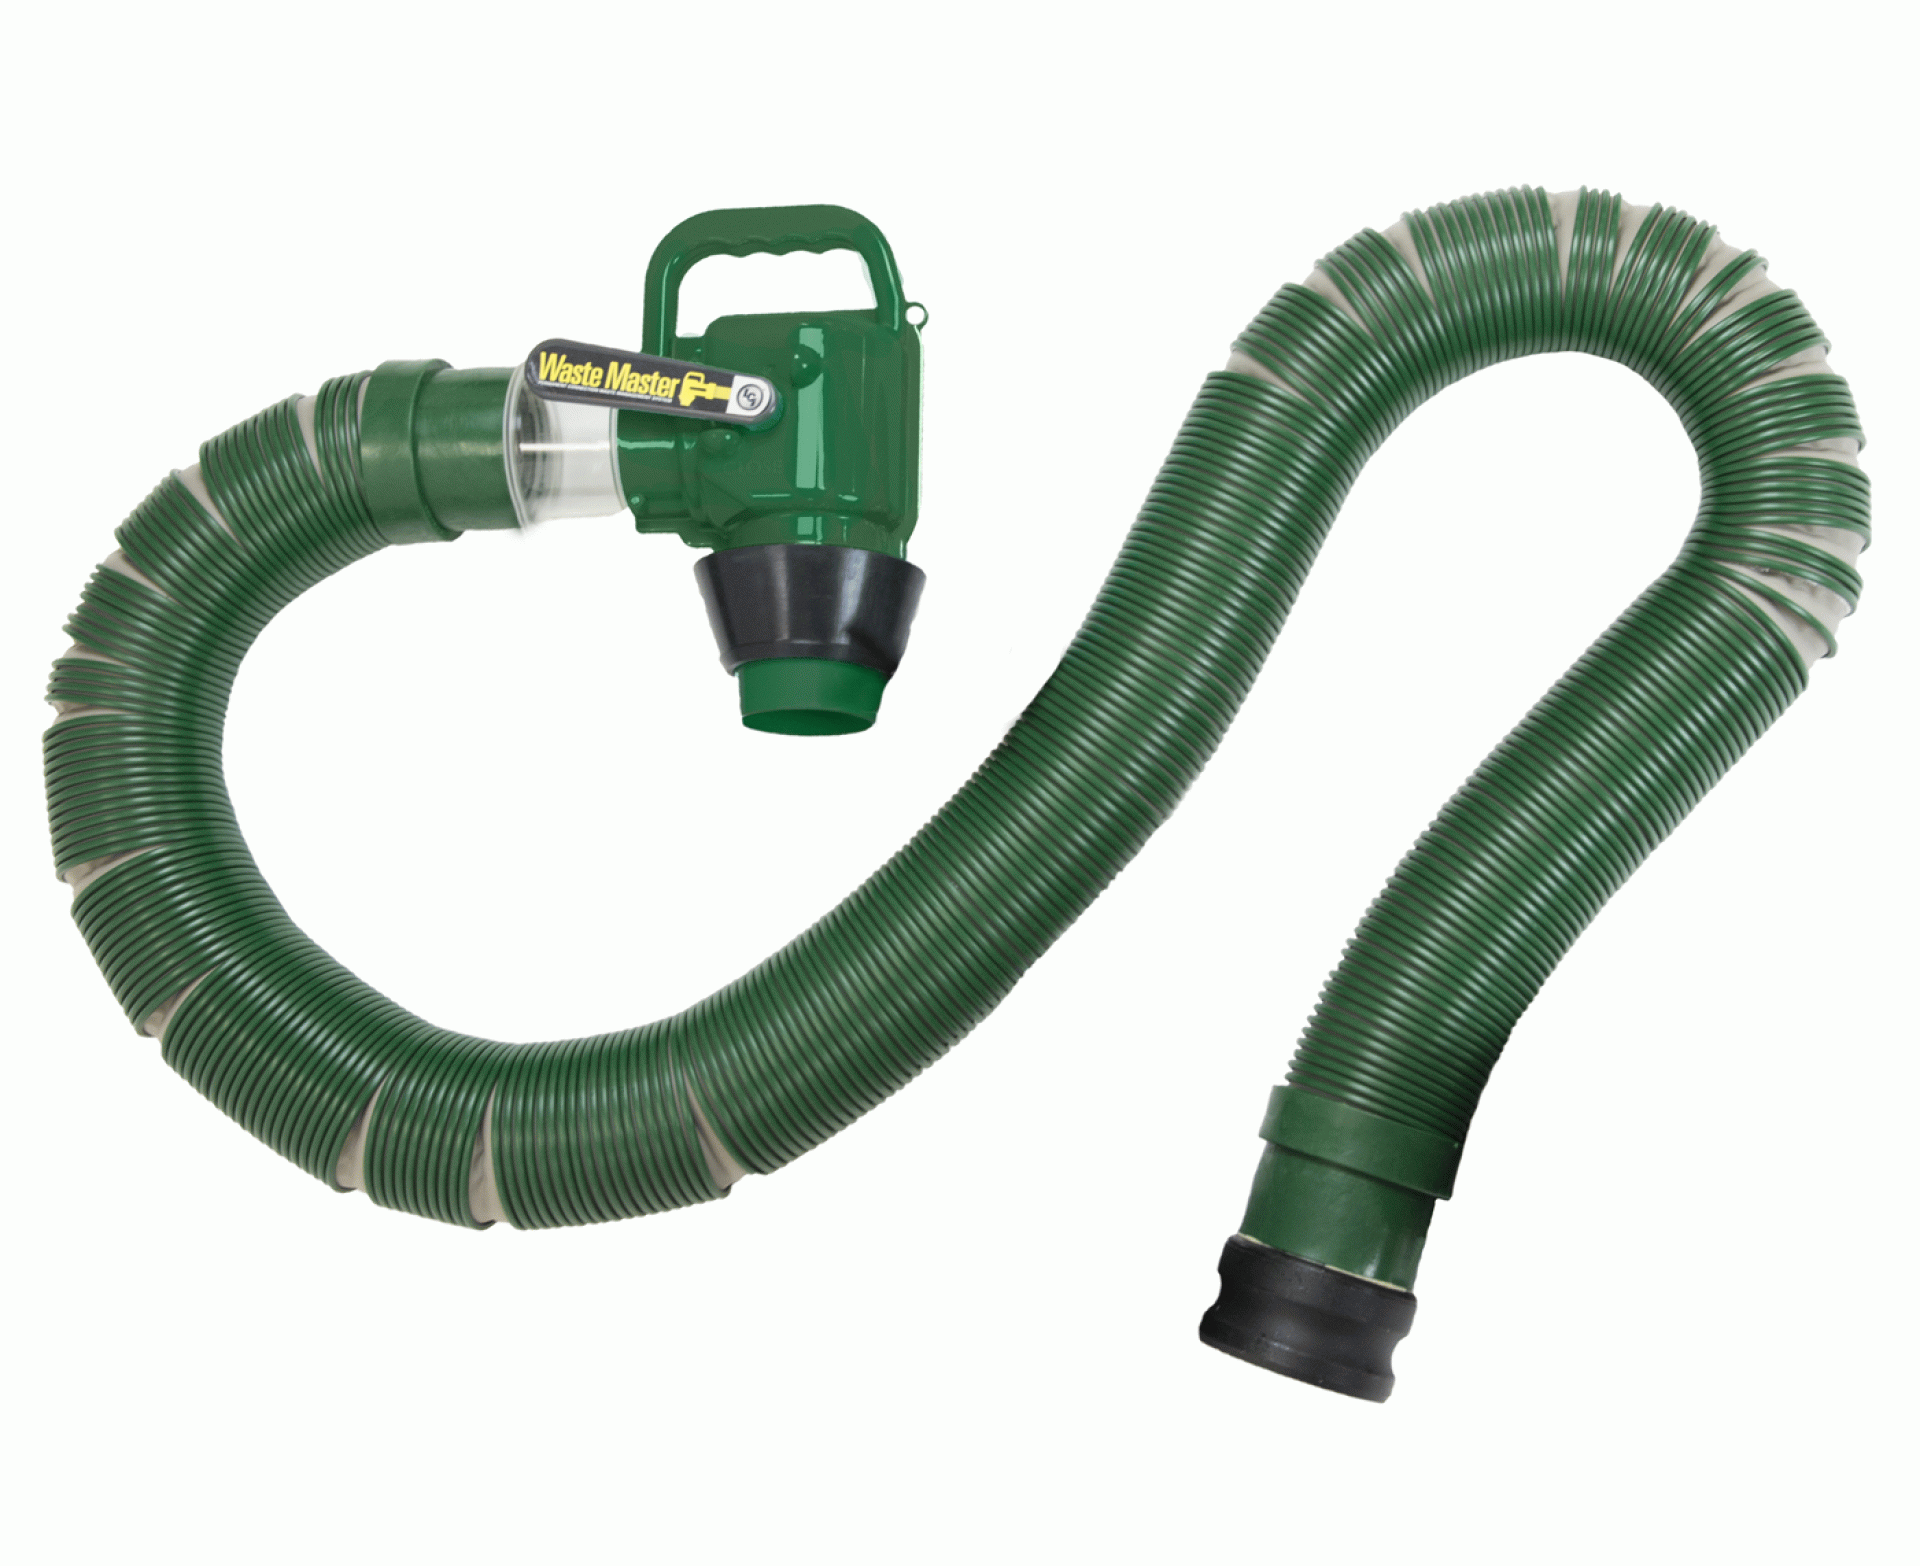 Lippert Components | 359724 | Waste Master All-in-one Sewer Management